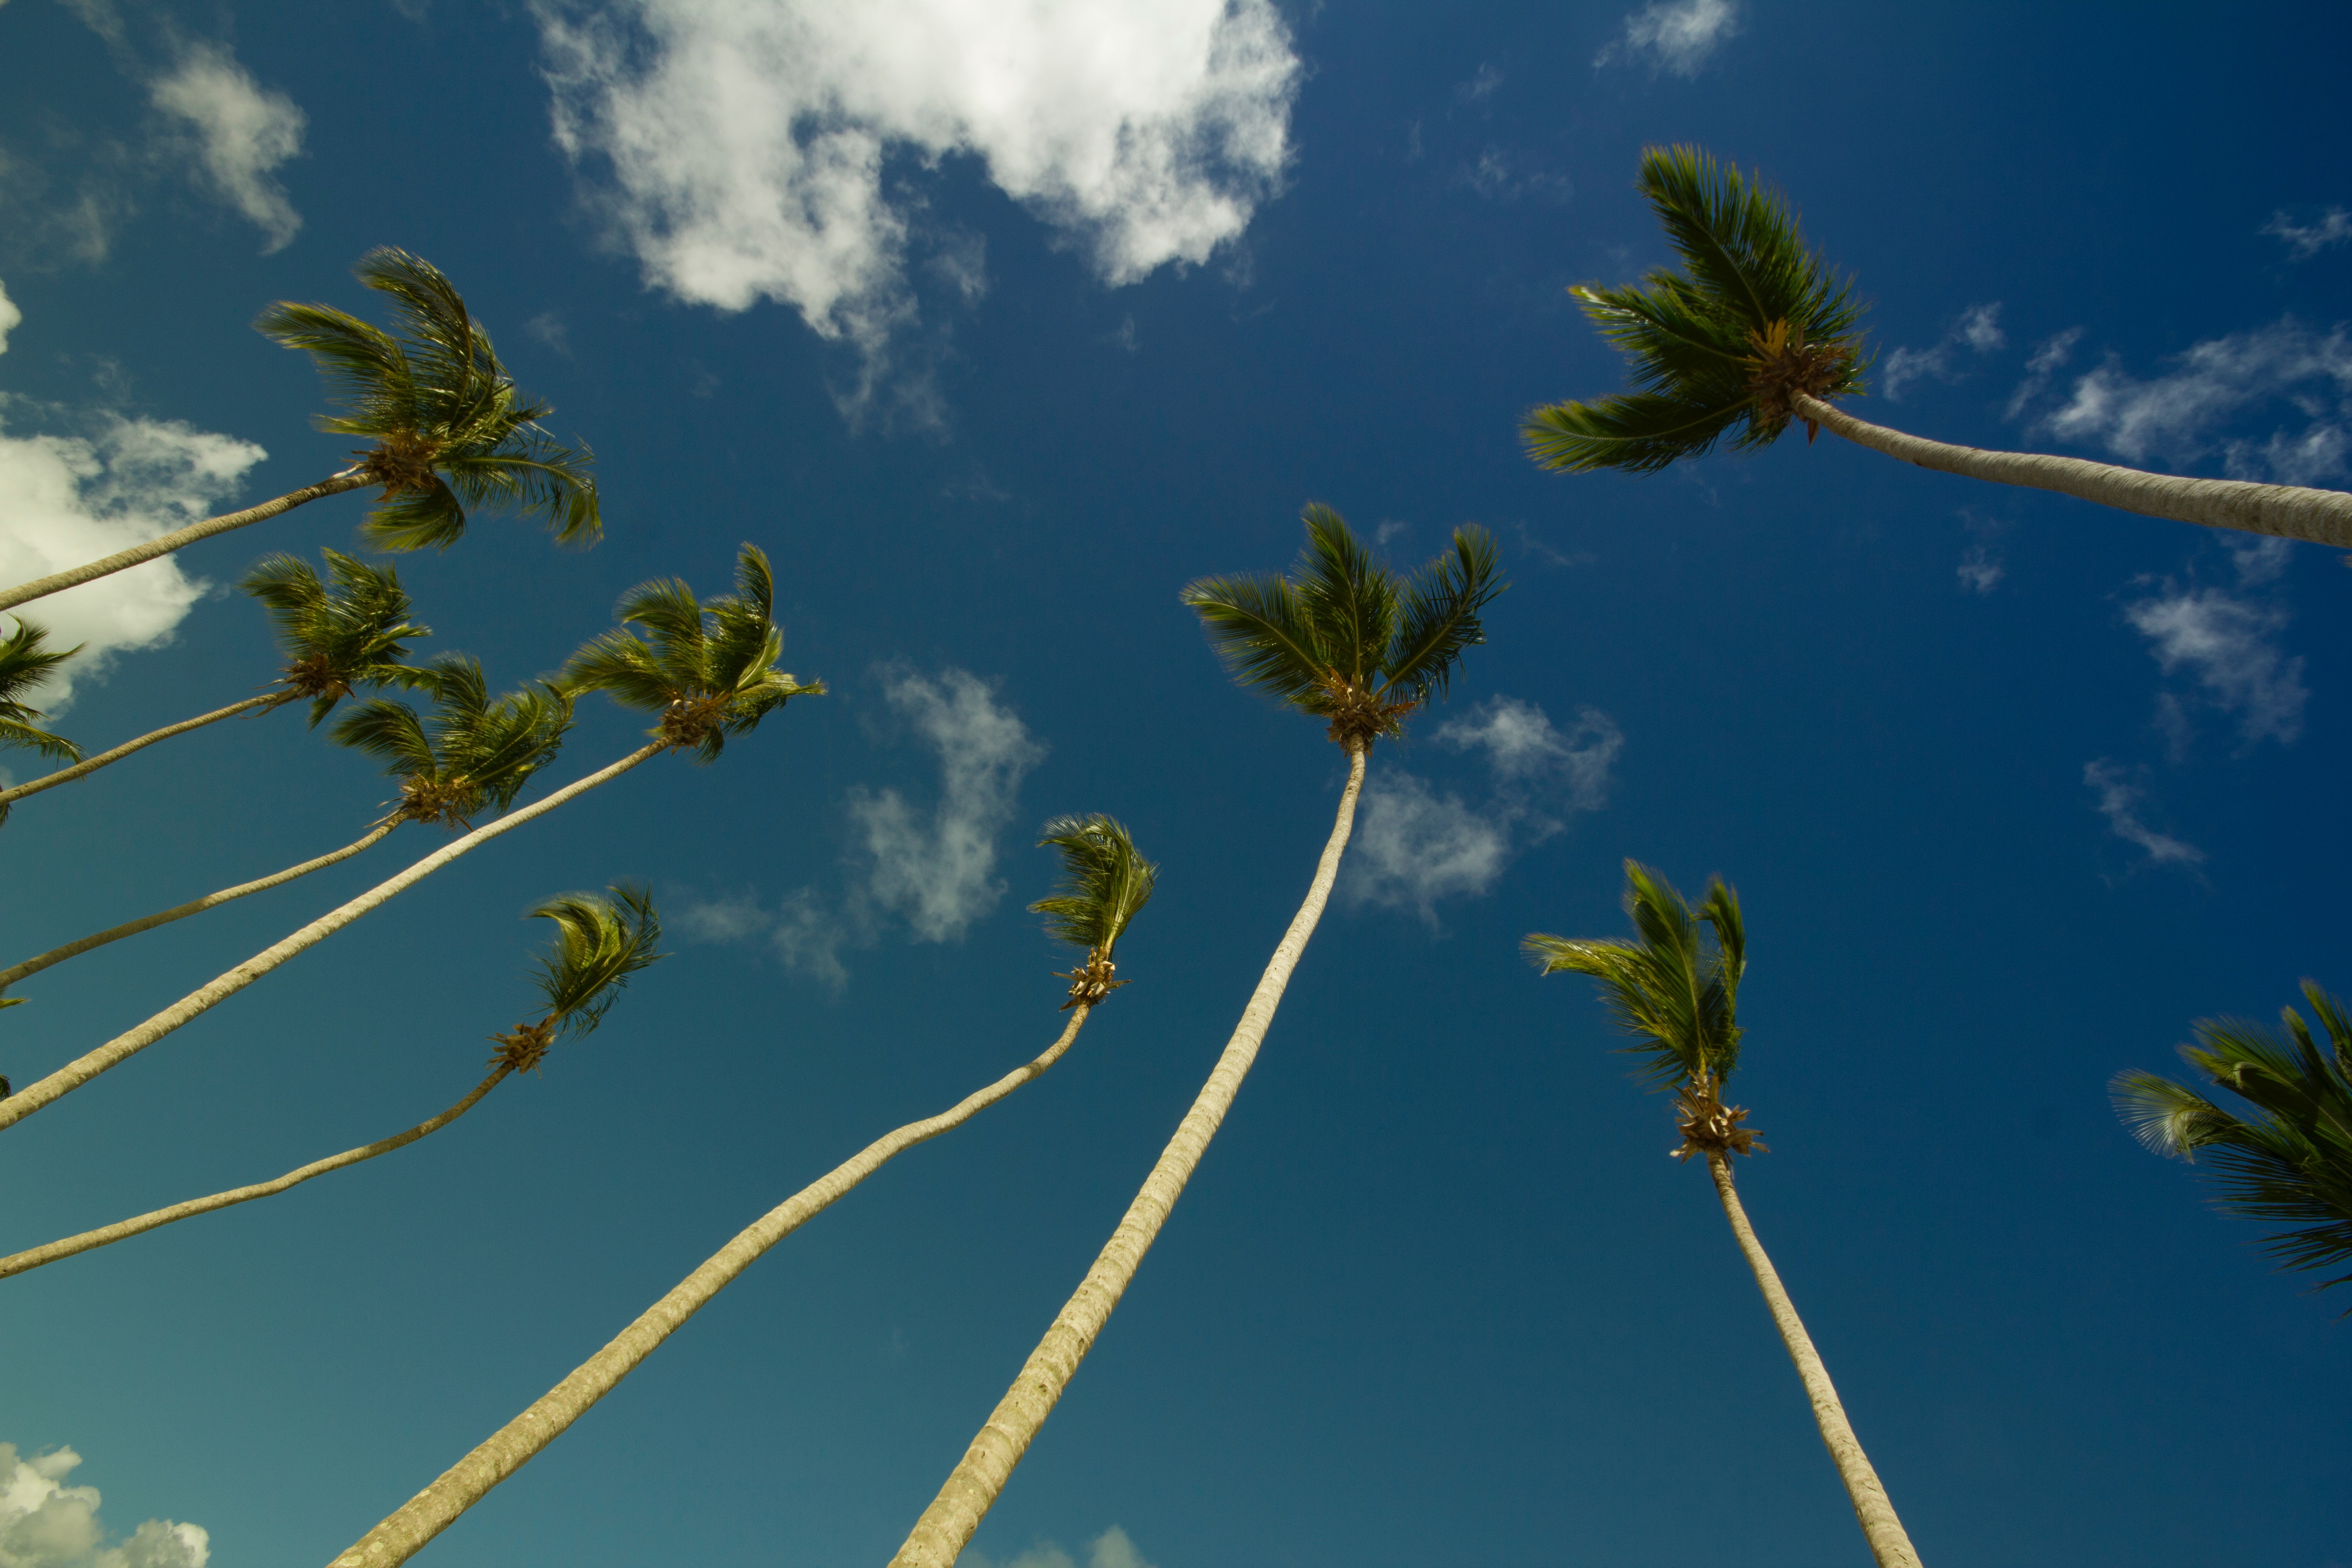 Coconut trees under gray and blue cloudy sky during daytime photo